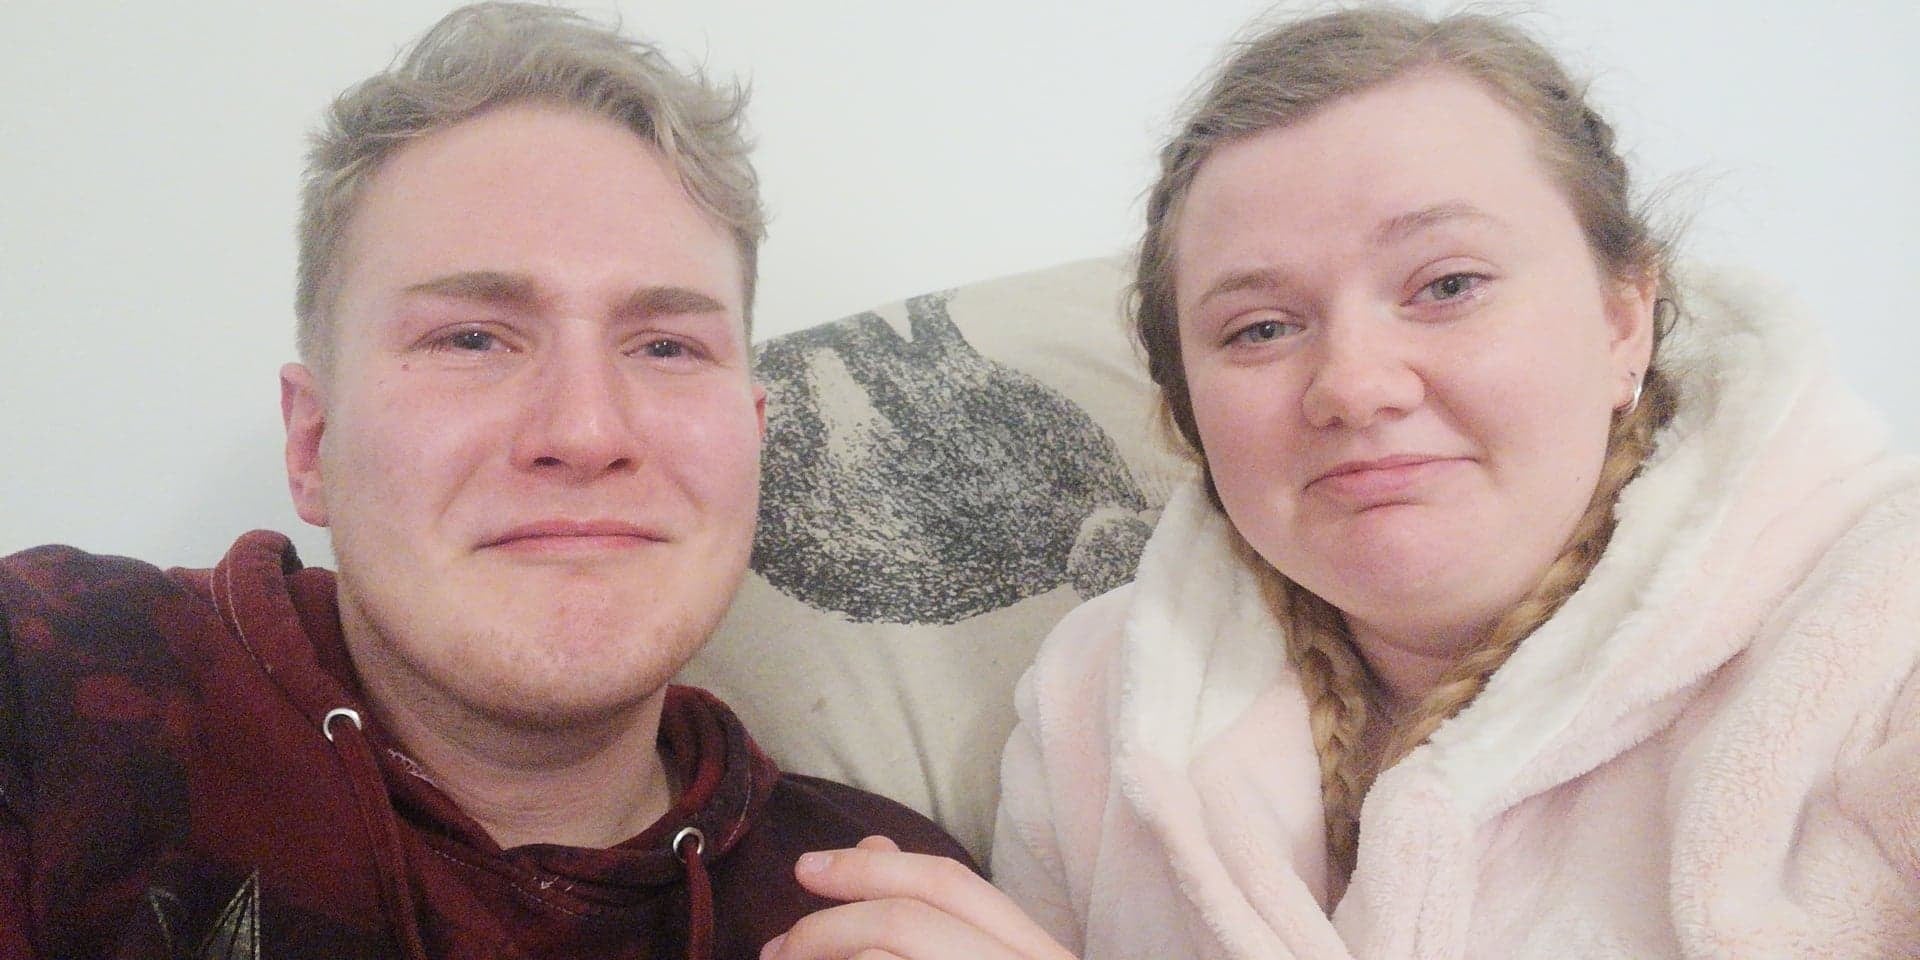 Two people crying after watching a tv show